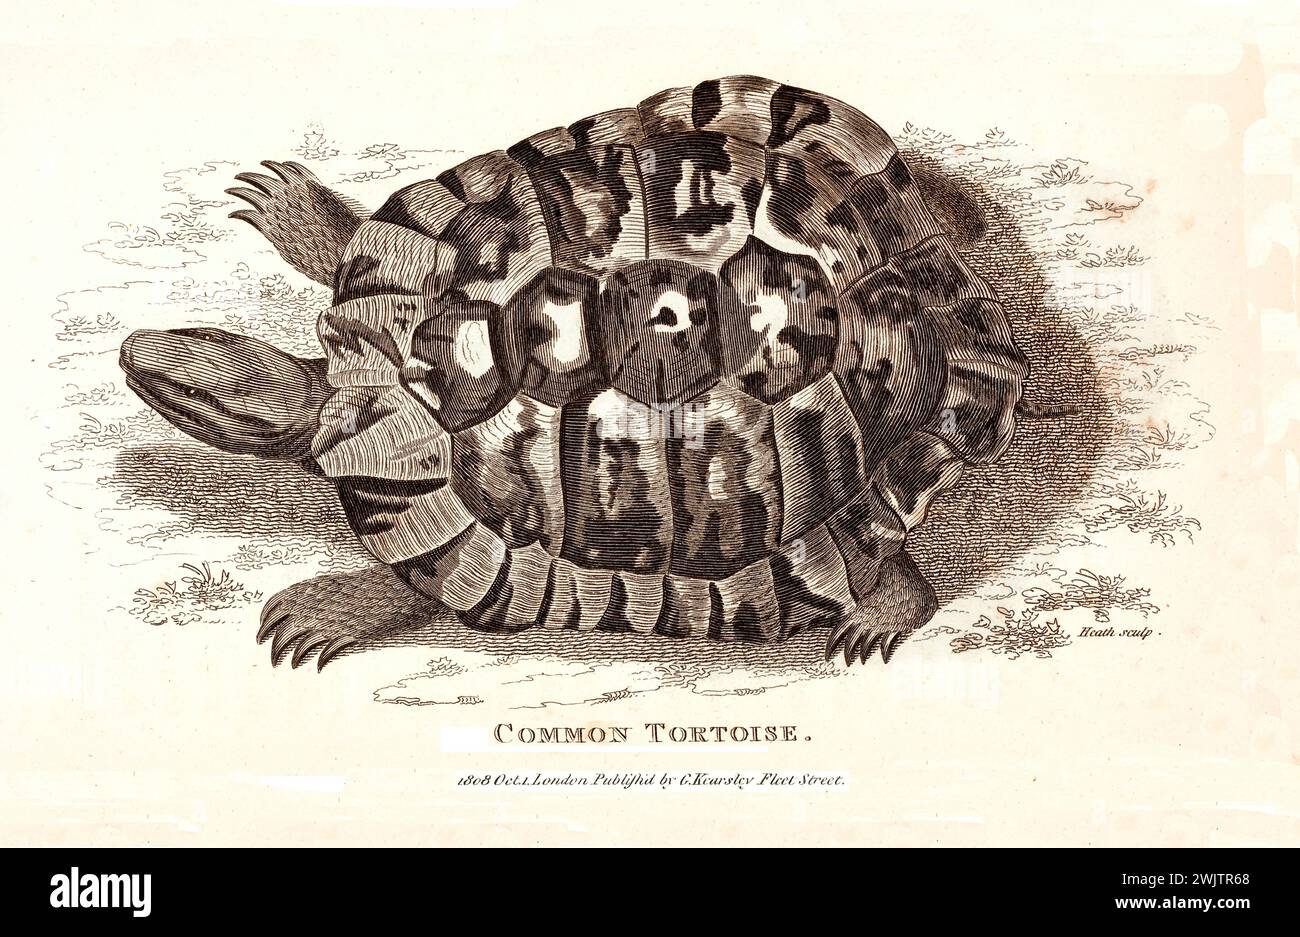 Old engraved illustration of Common Tortoise. Created by George Shaw, published in Zoological Lectures, London, 1809 Stock Photo